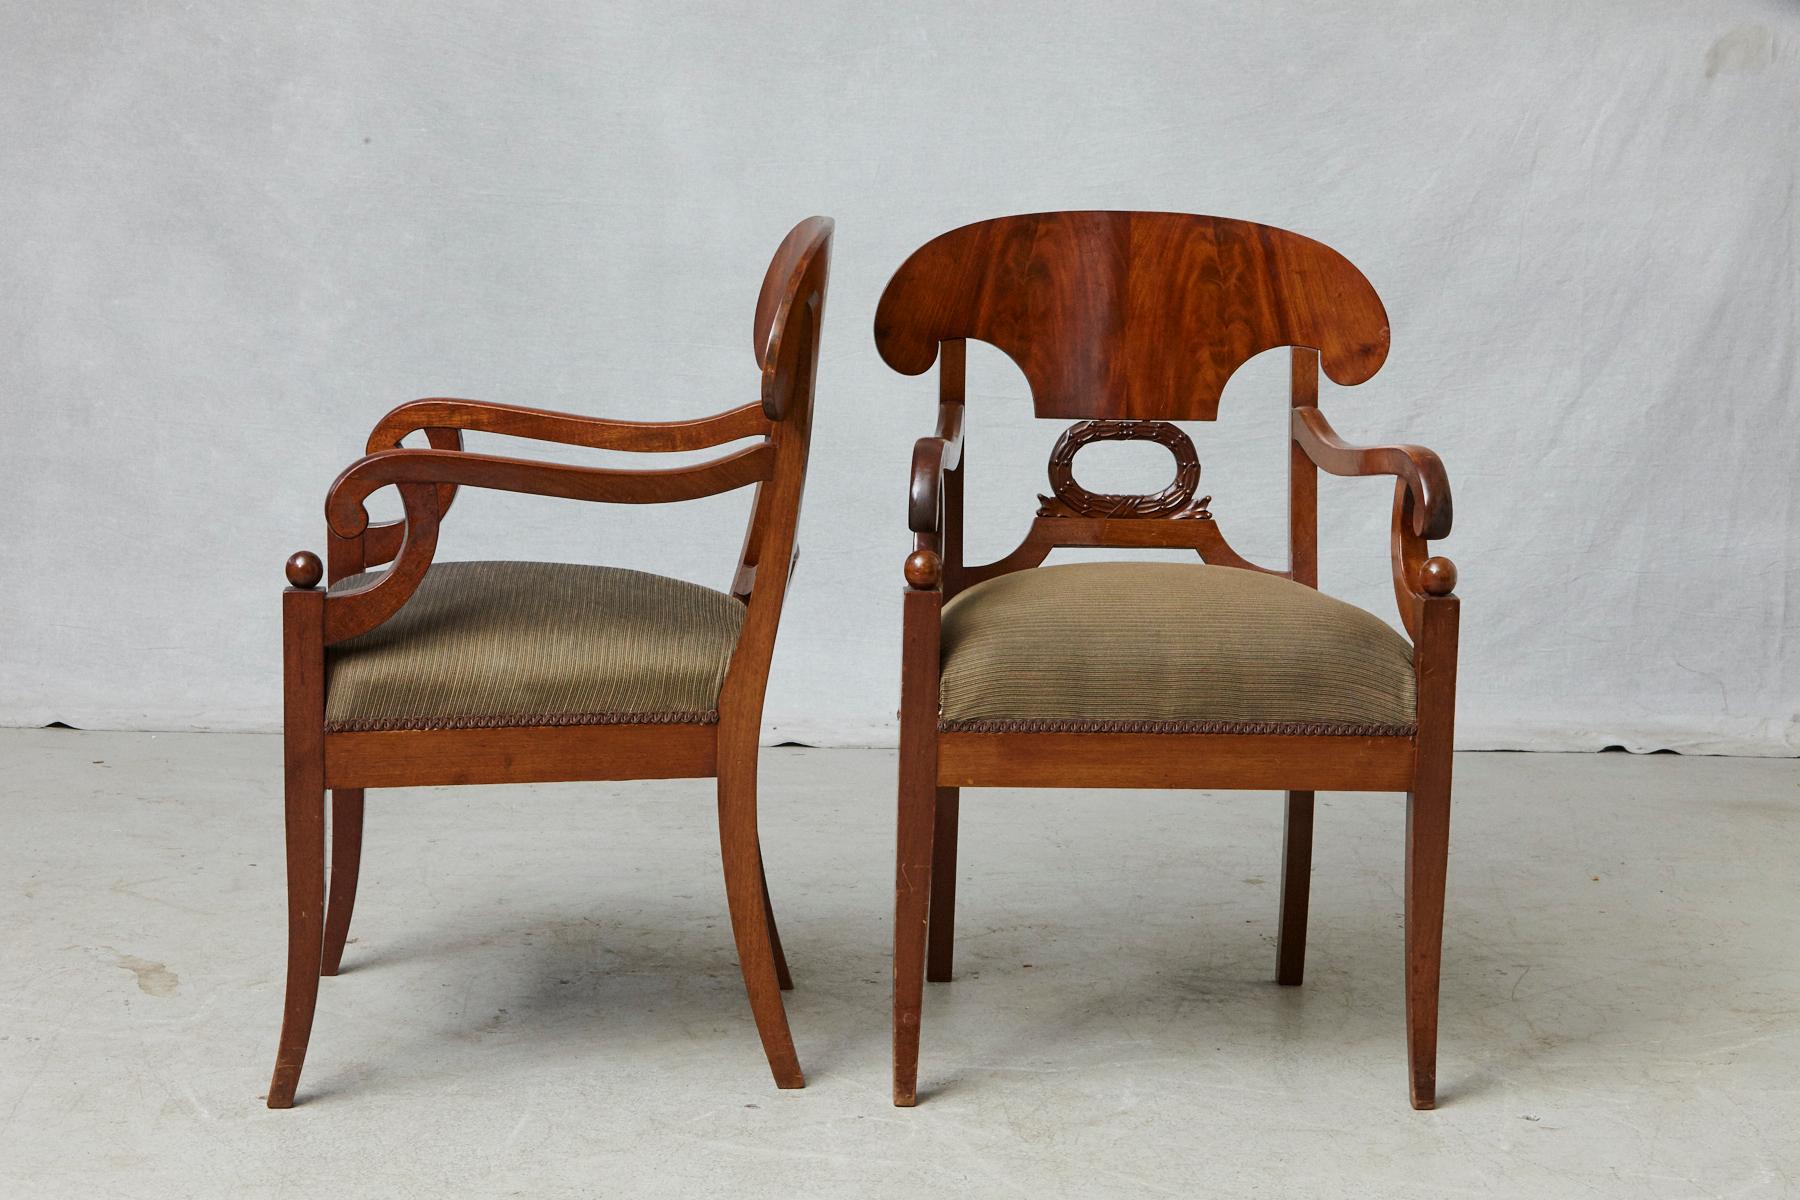 Pair of late 19th century Swedish Biedermeier or Karl Johan style birch wood armchairs with curved upper back over a wreath decor, scroll over arms and sabre legs with ball shaped finials, 
circa 1880-1900.
The chairs have a few smaller scratches